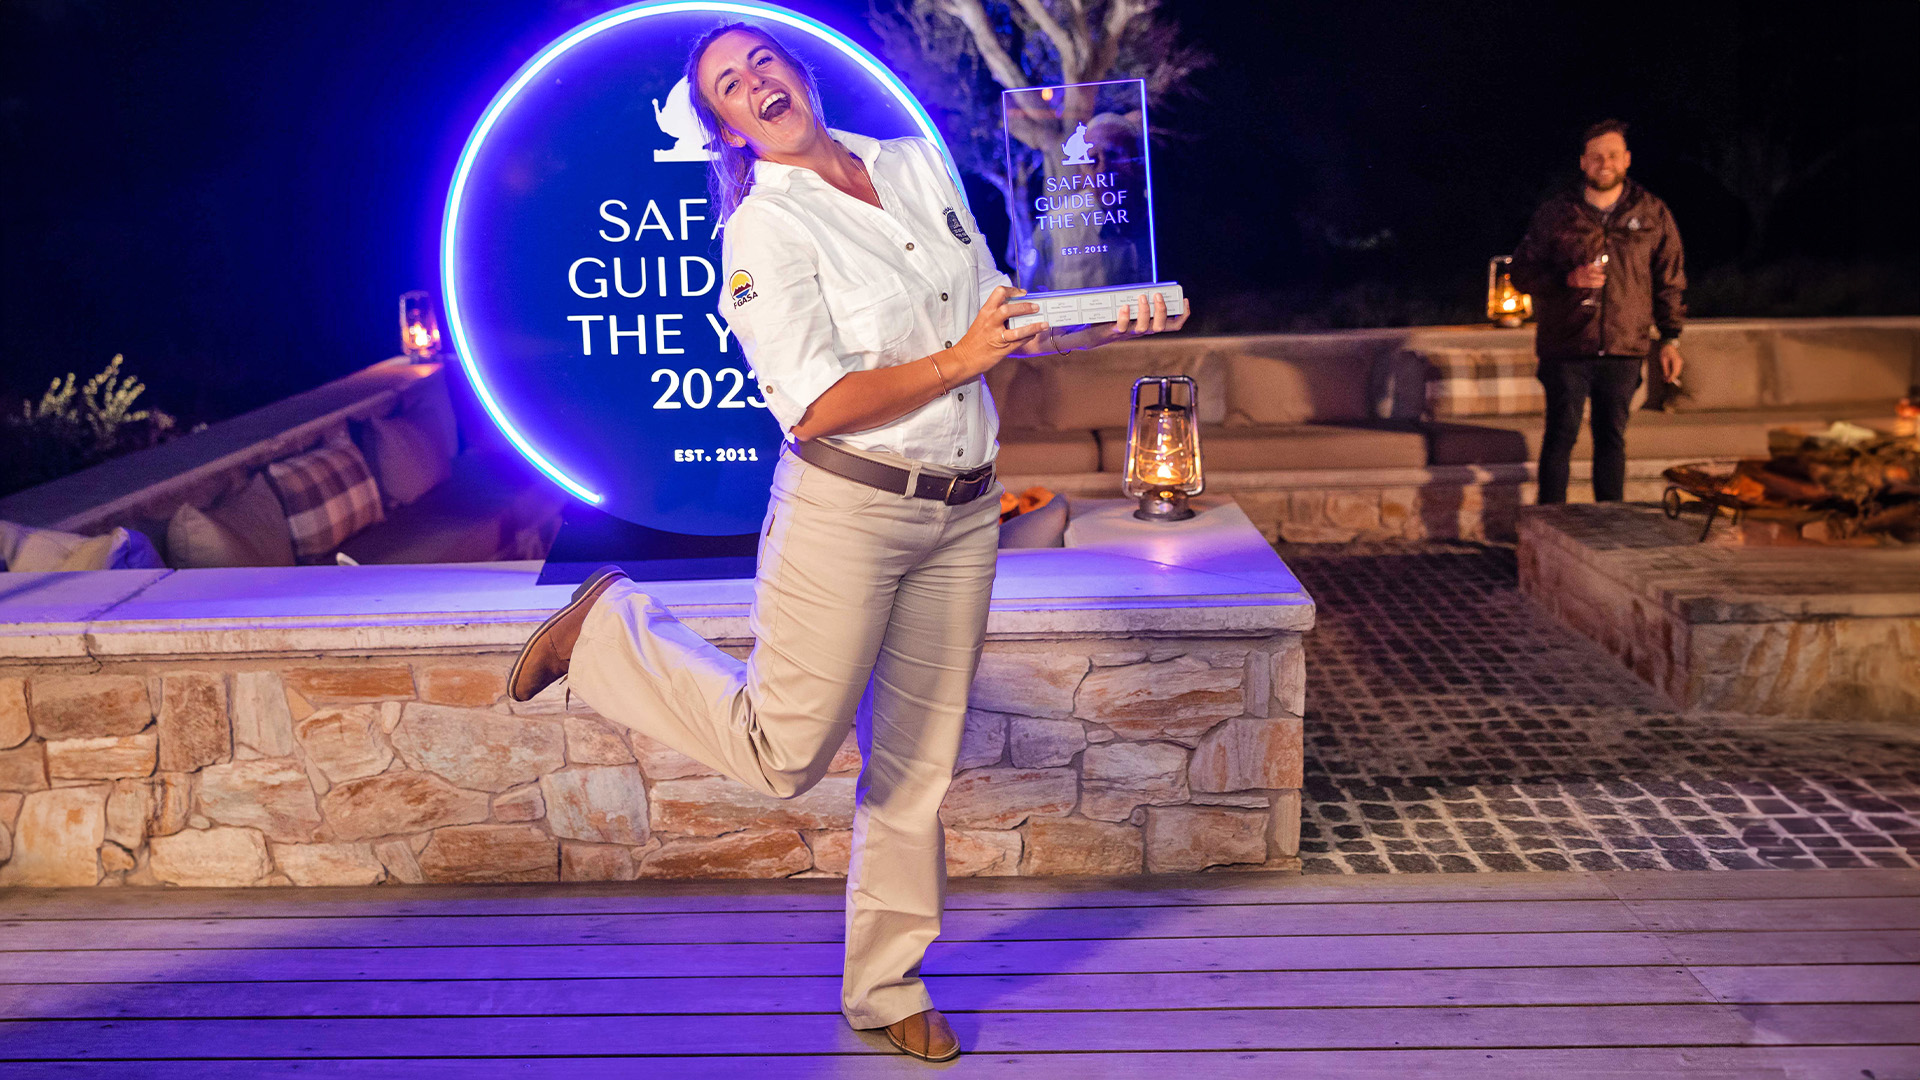 The First Female to Win Safari Guide of the Year